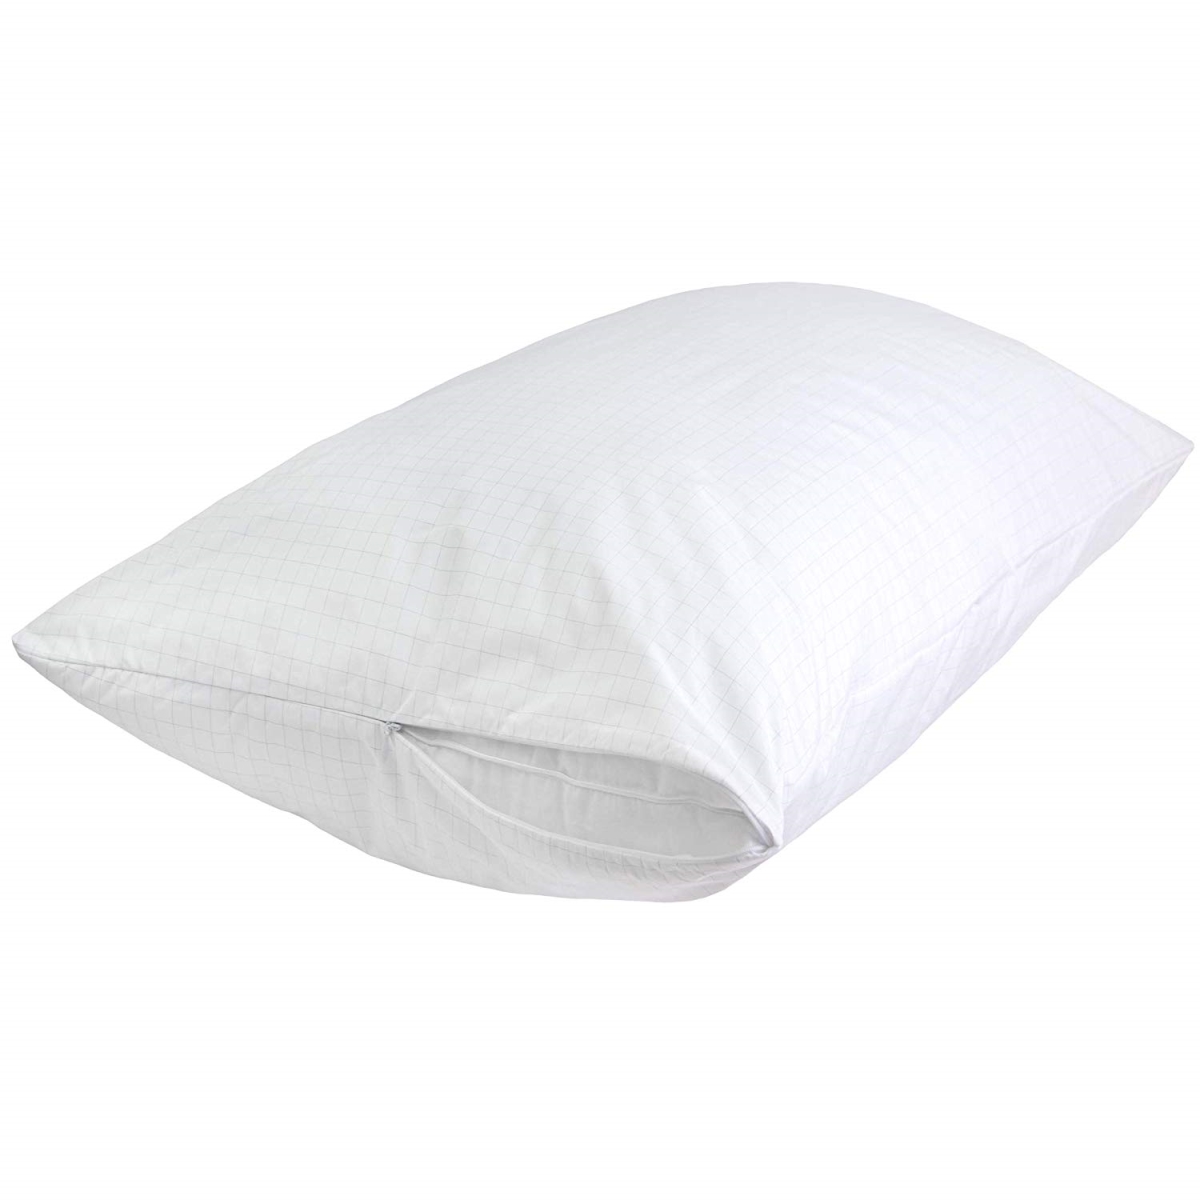 733386 Sleep Solutions By Carbon-infused Waterproof Pillow Protector, White - Queen Size